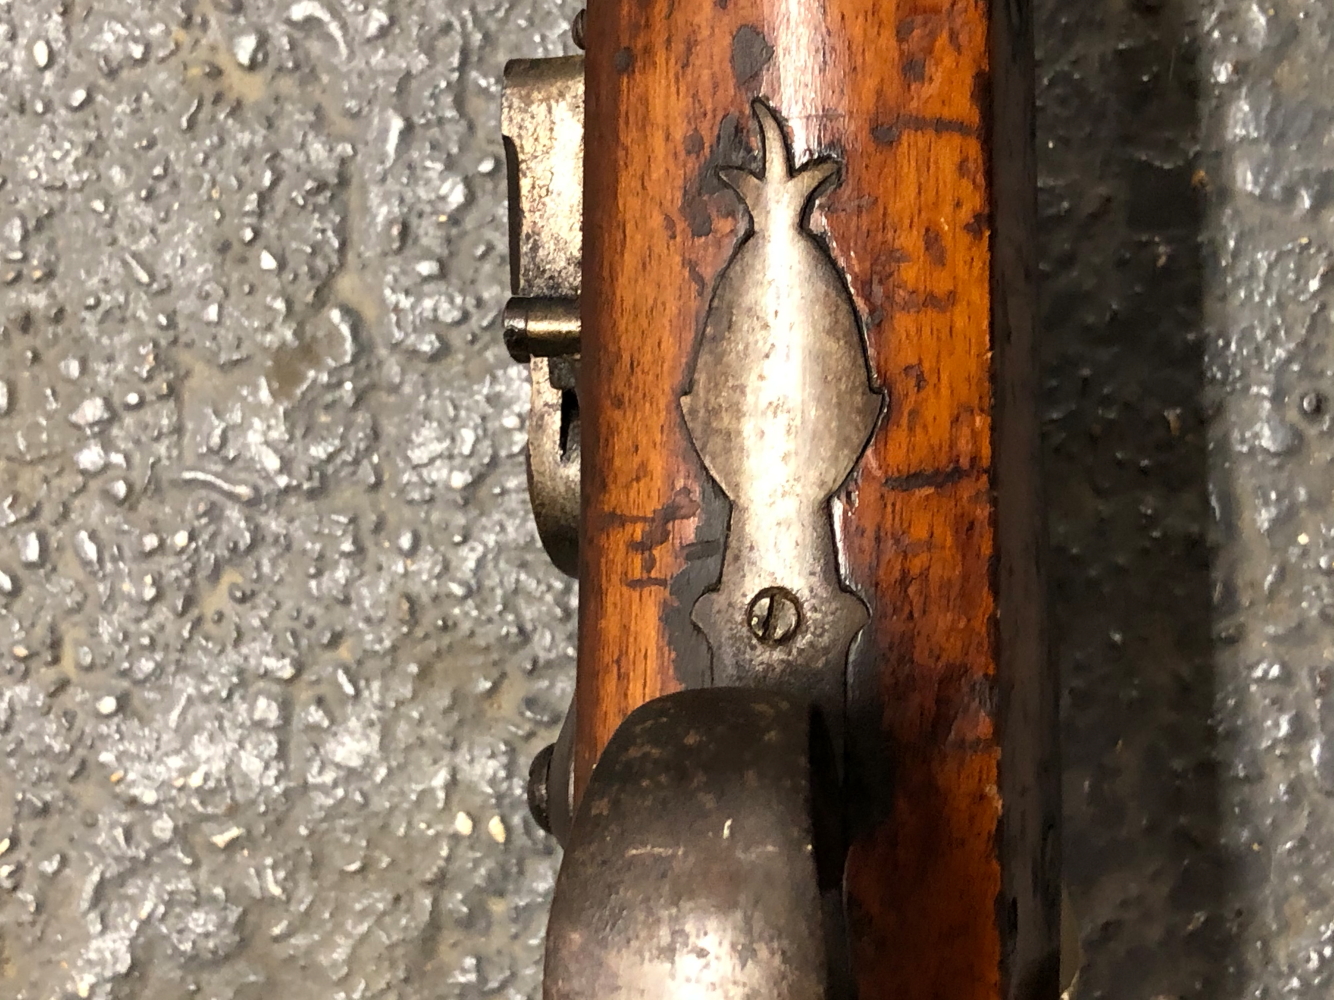 AN EAST INDIA COMPANY FLINTLOCK MUSKET, 39 INCH BARREL, BEVELLED LOCK WITH RAMPANT LION EMBLEM, FULL - Image 13 of 16